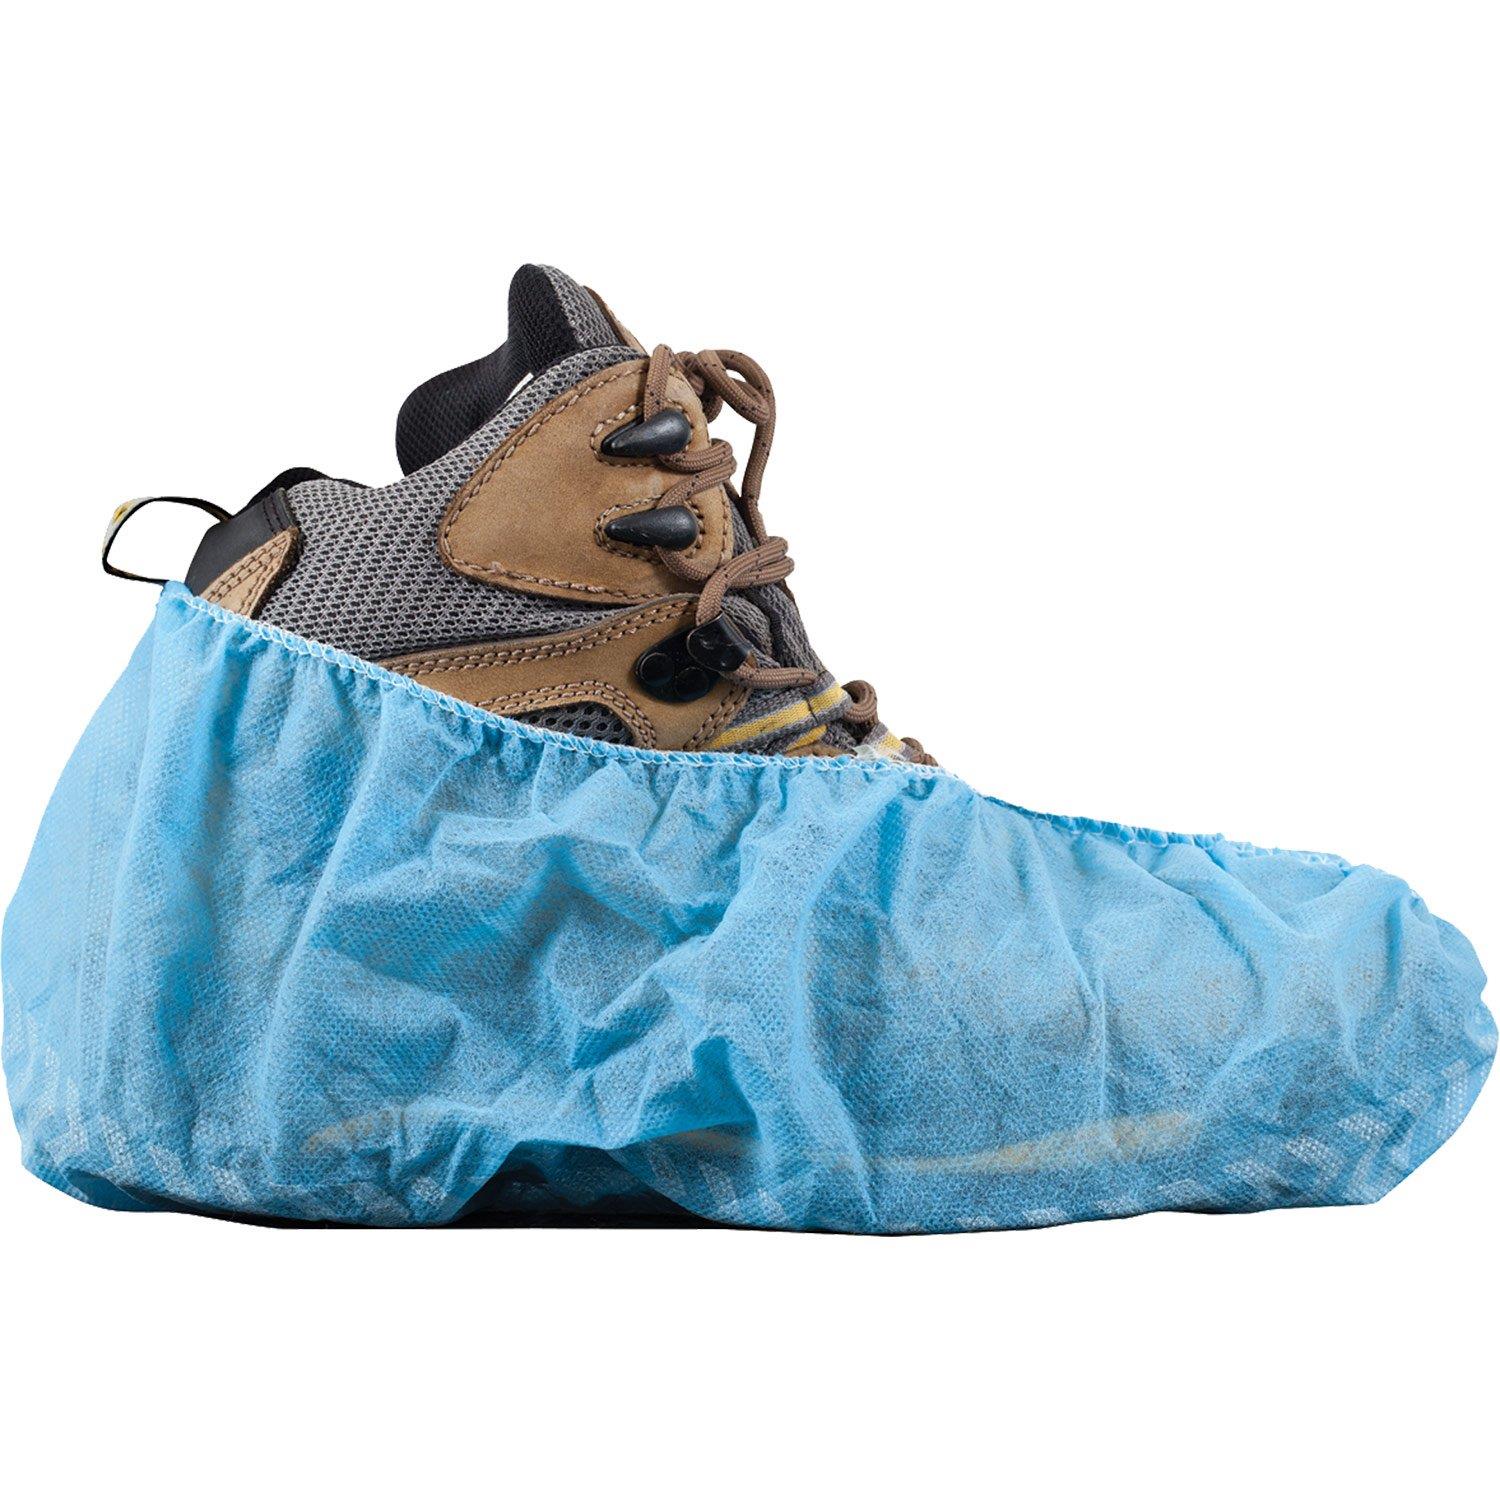 Shoe Covers with Anti-Skid Soles